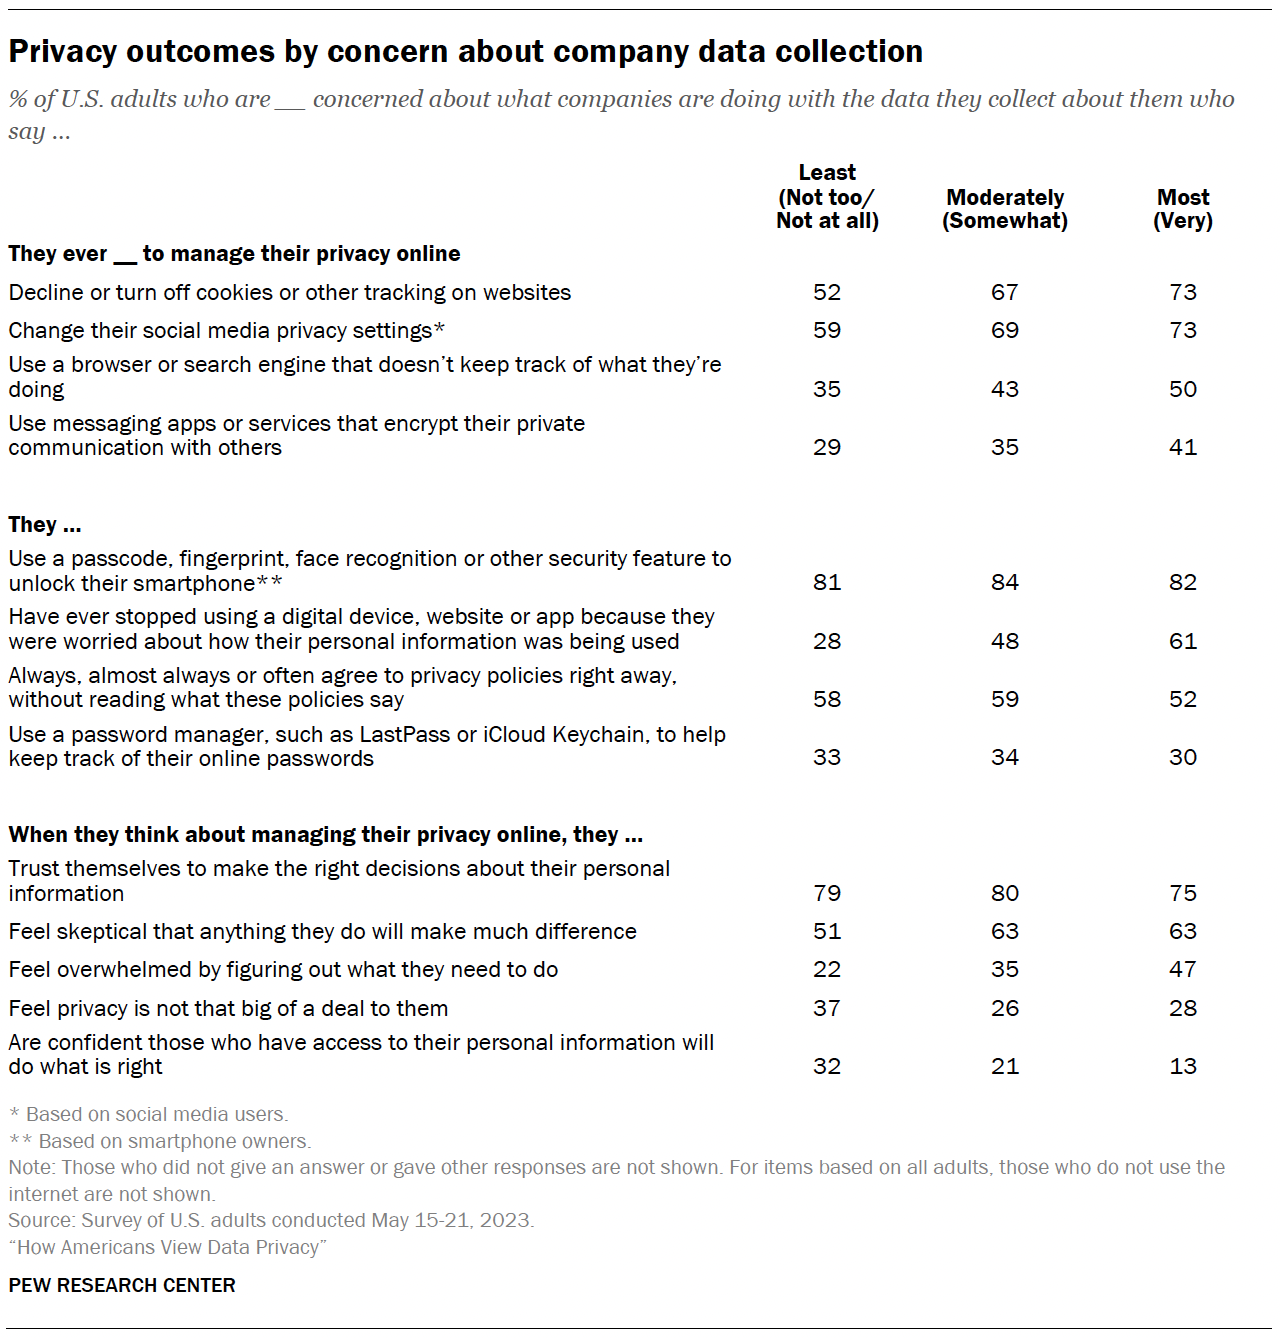 Privacy outcomes by concern about company data collection